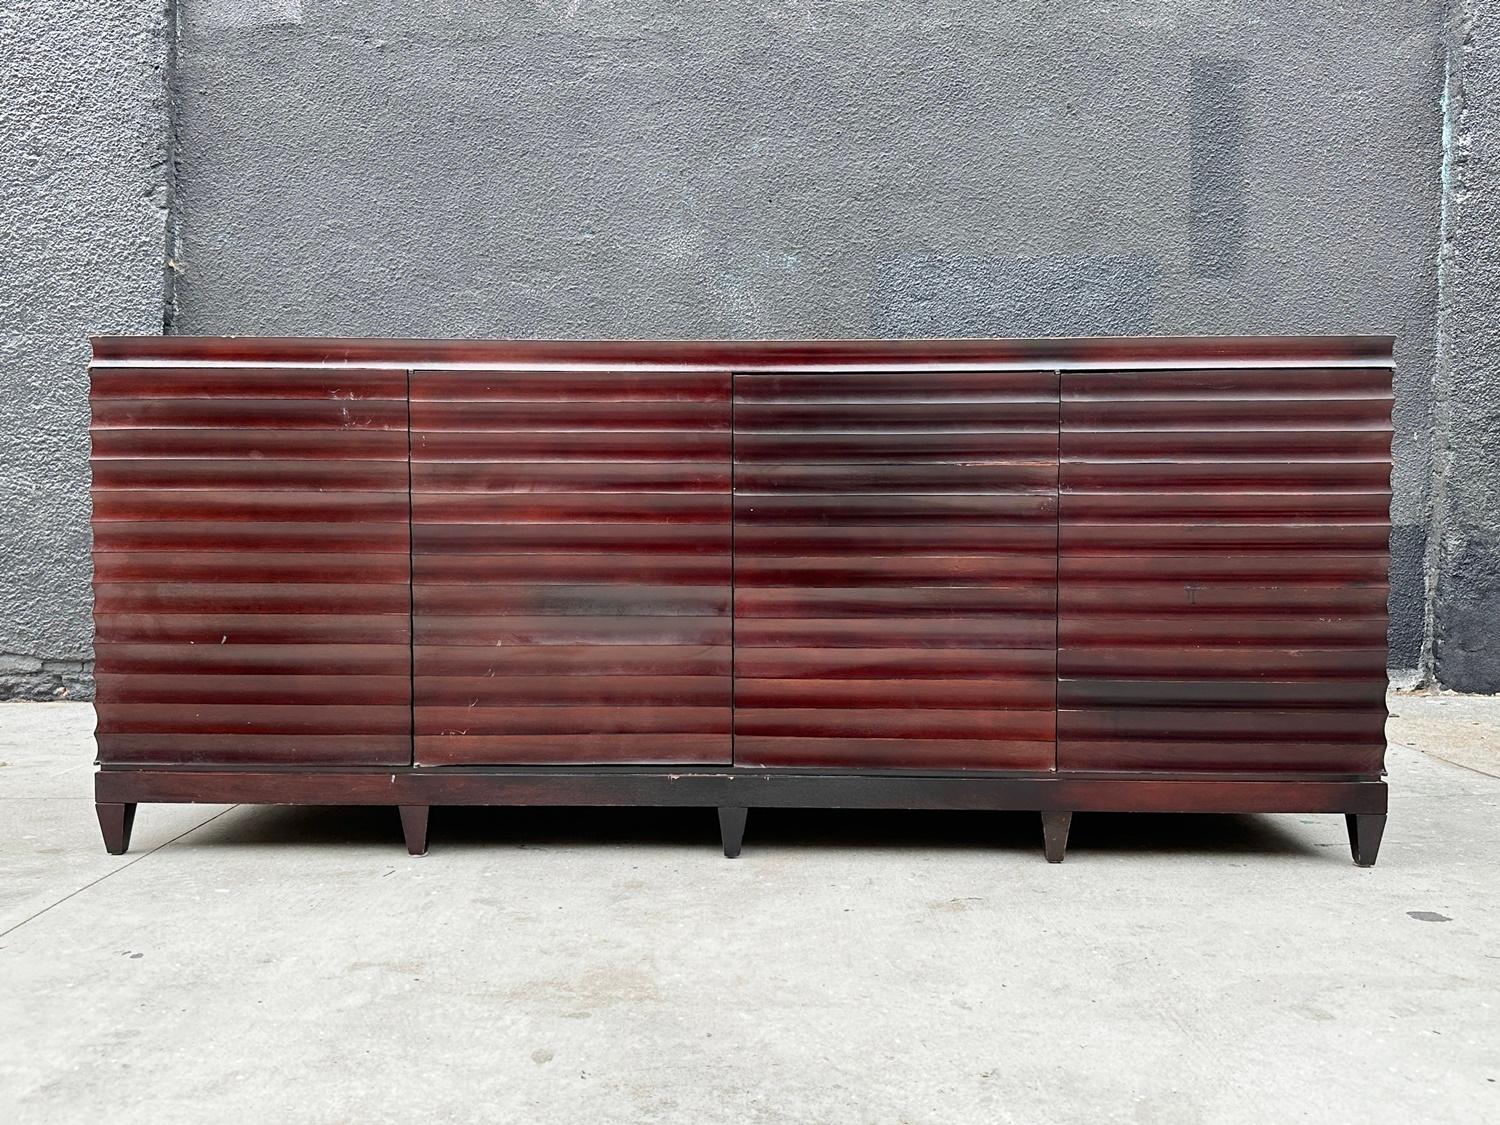 Introducing the exquisite Modern Fluted Buffet Sideboard Cabinet by Barbara Barry, crafted exclusively for Baker Furniture in 2010. This impeccable creation showcases the timeless elegance that defines the brand. Meticulously constructed from solid